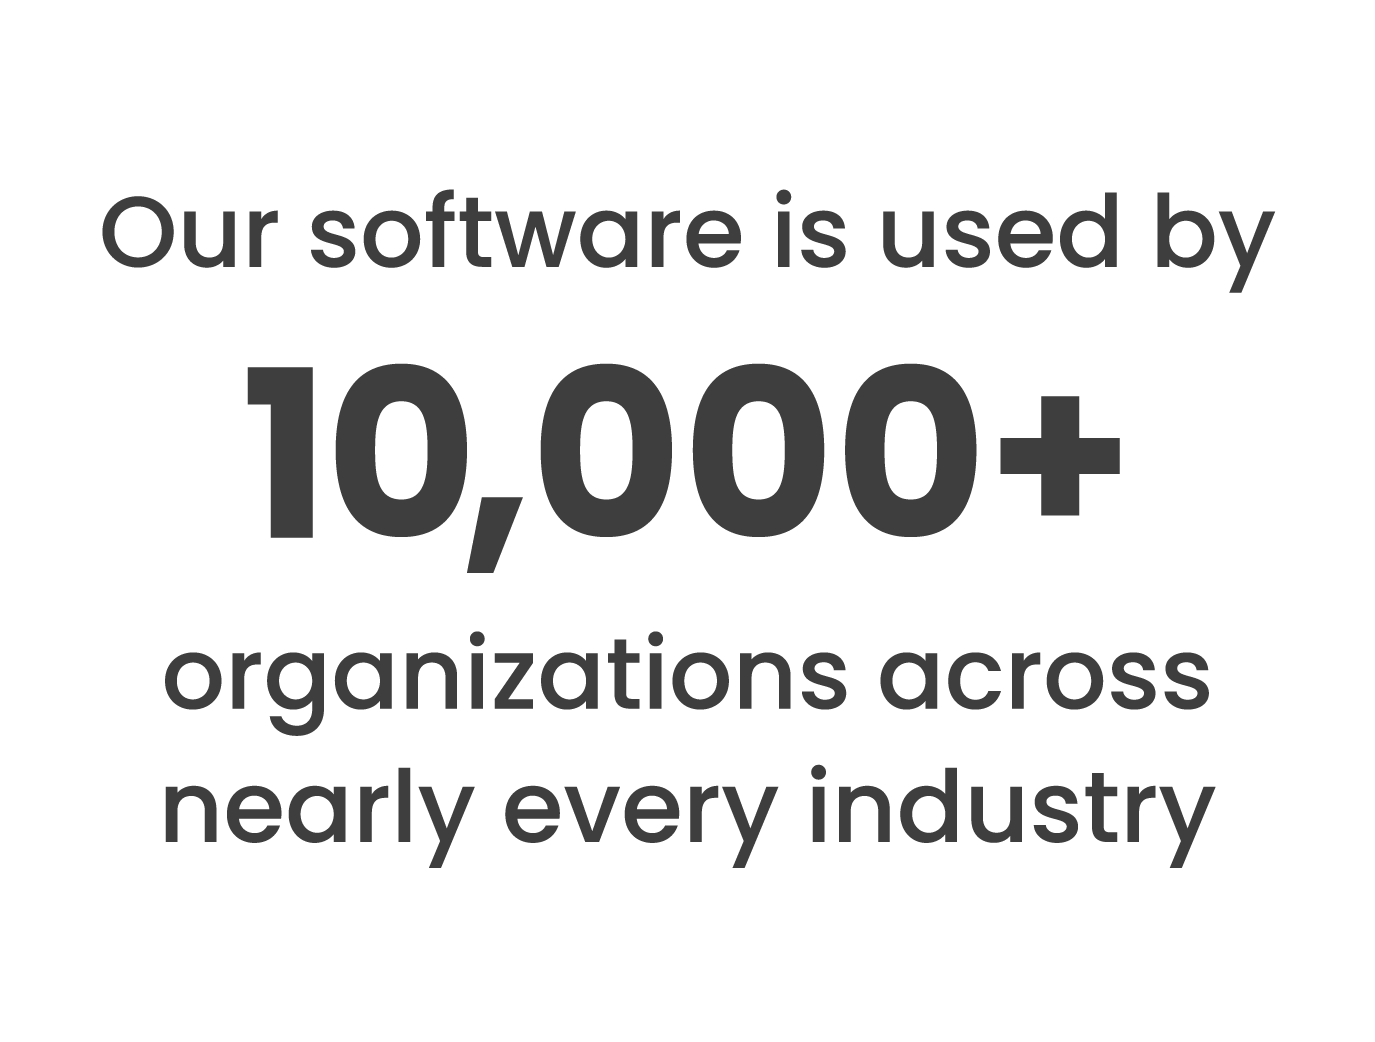 Our software is used by more than 10,000 organizations across nearly every industry